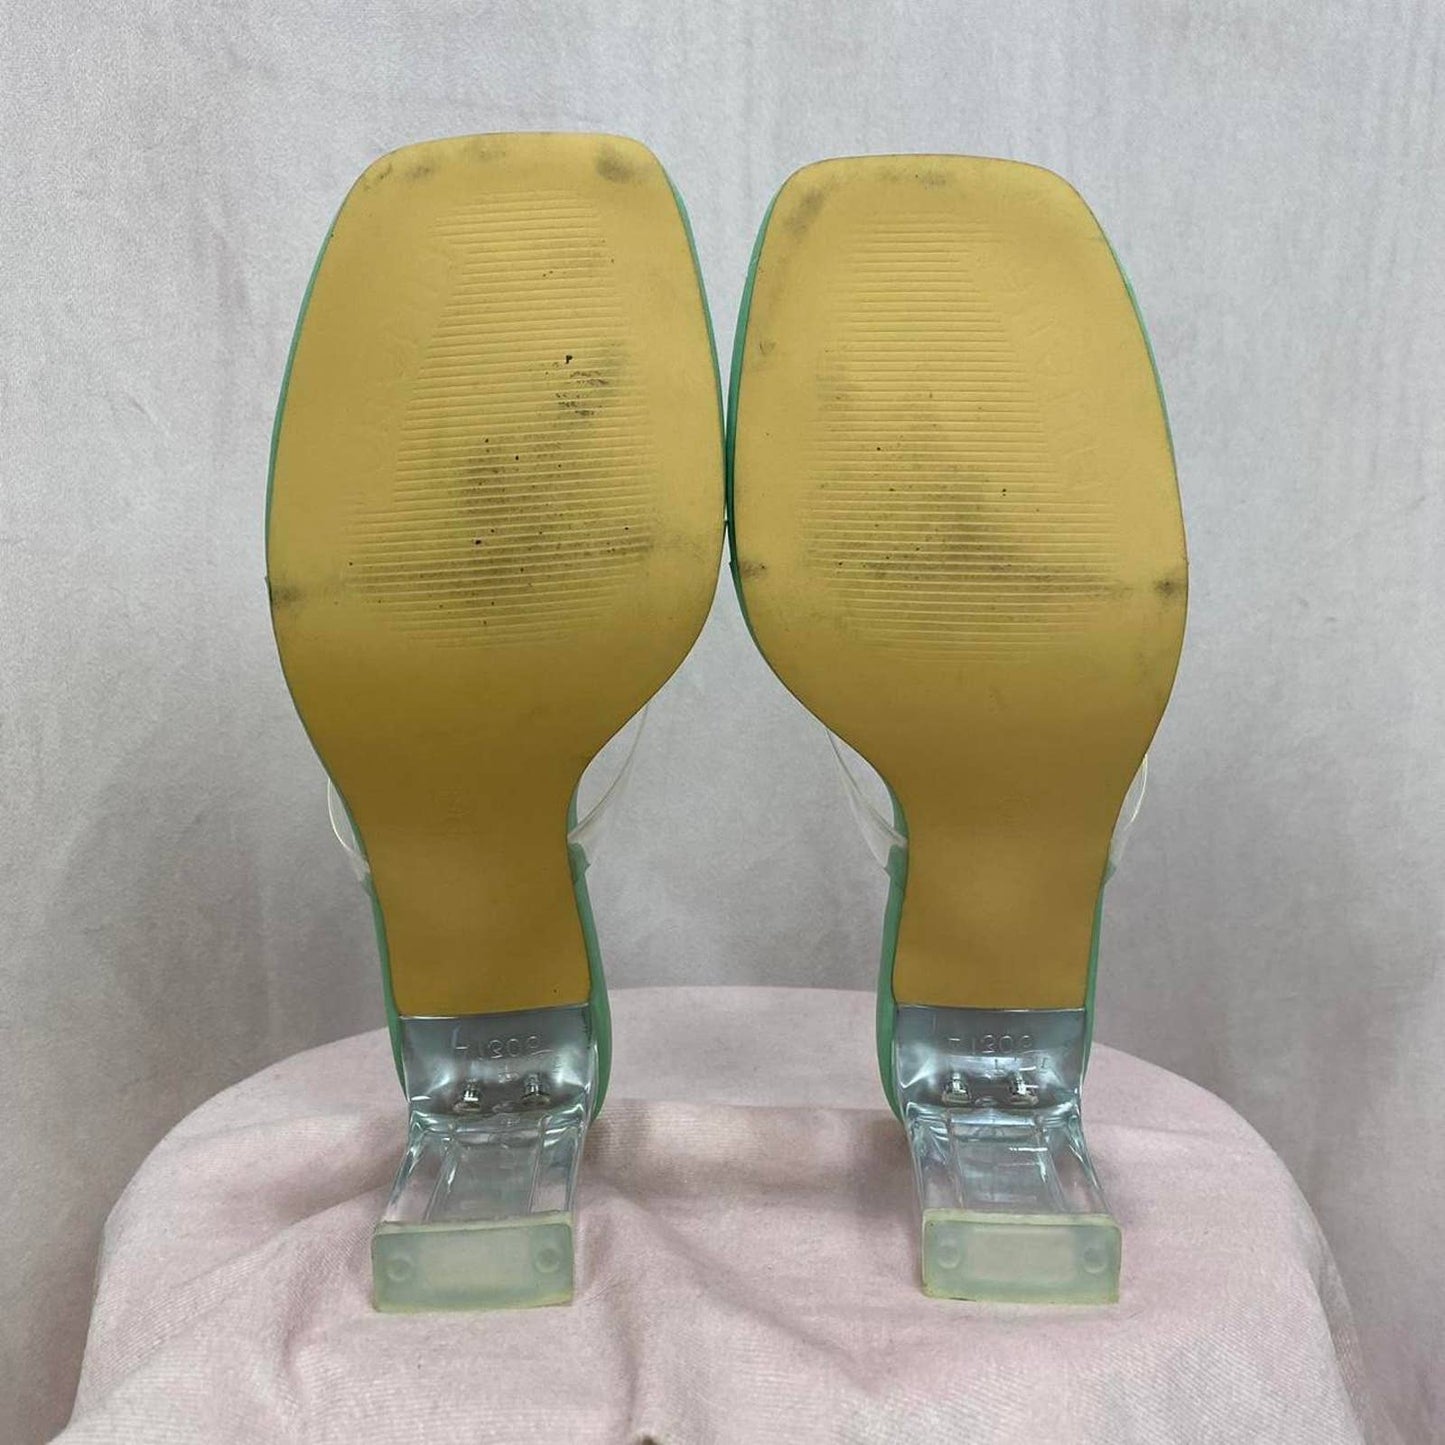 Secondhand Liliana Aura-2 Clear Sandal Heels in Mint Green, Size 7